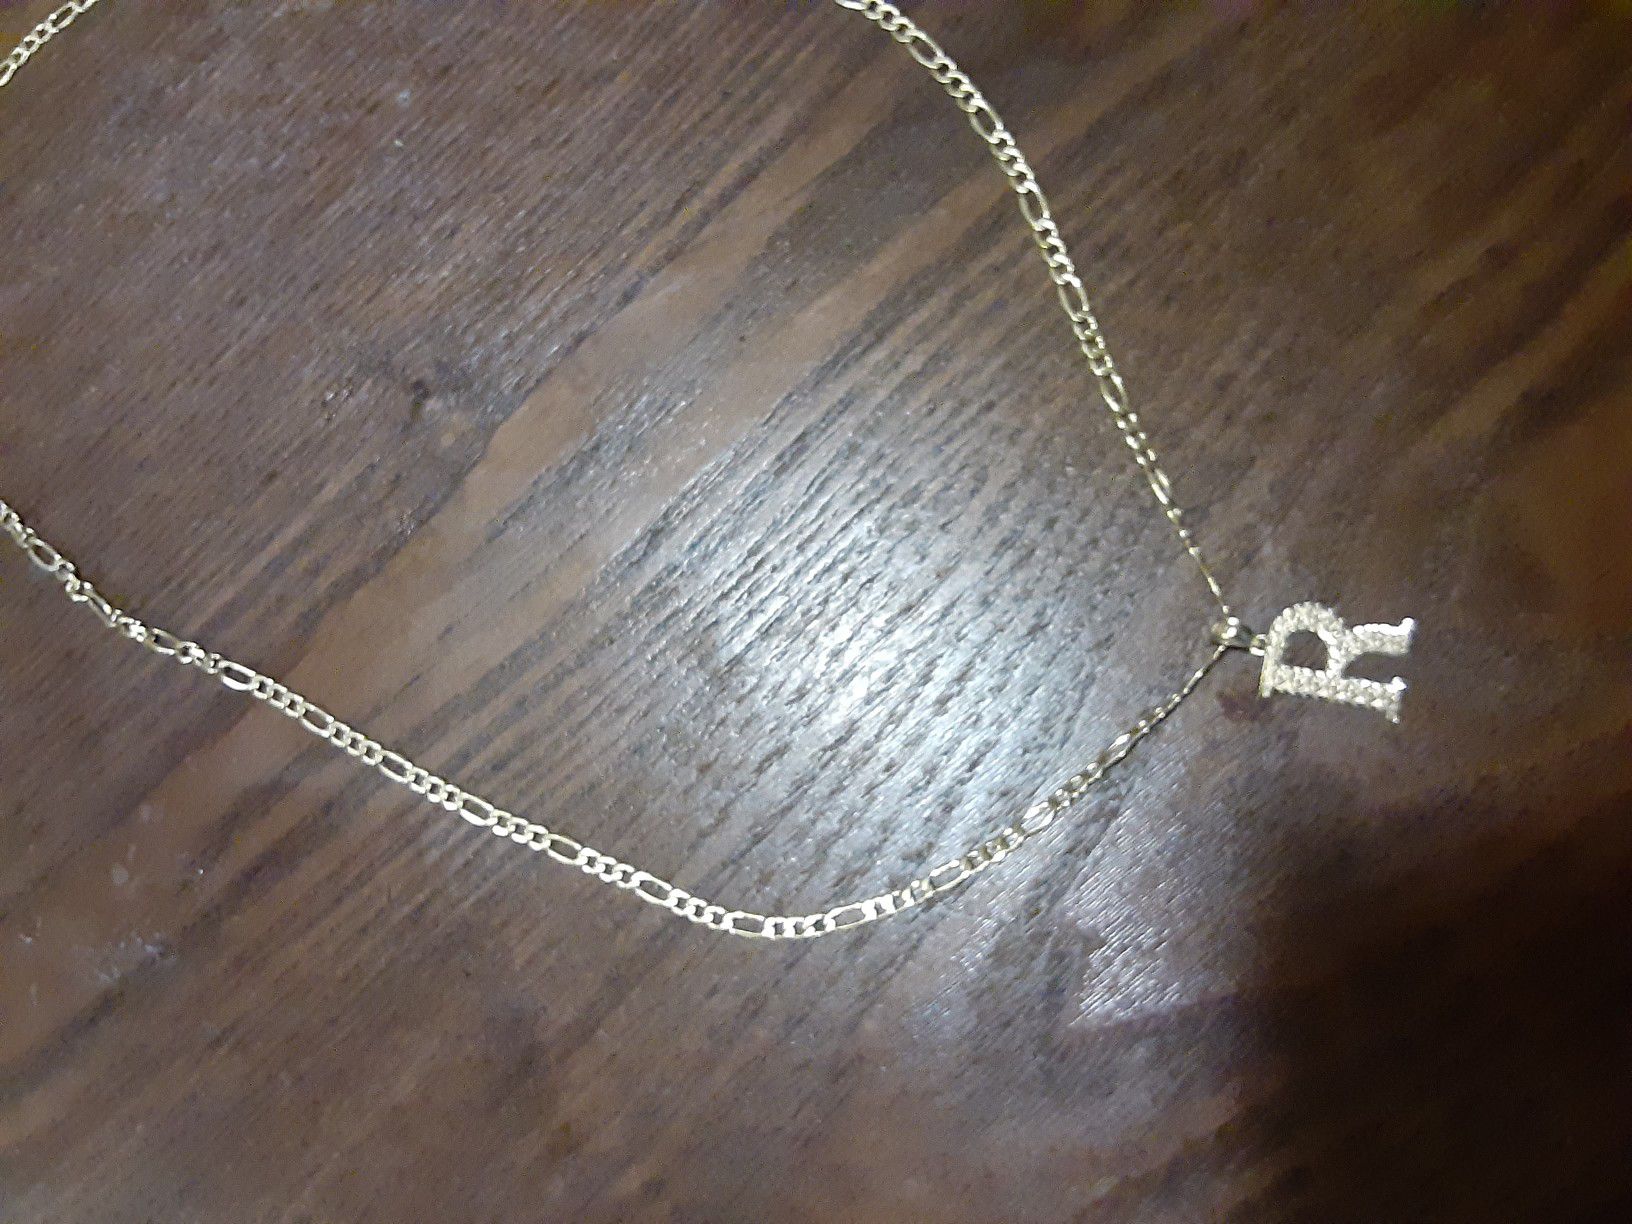 10k real gold chain and charm $145